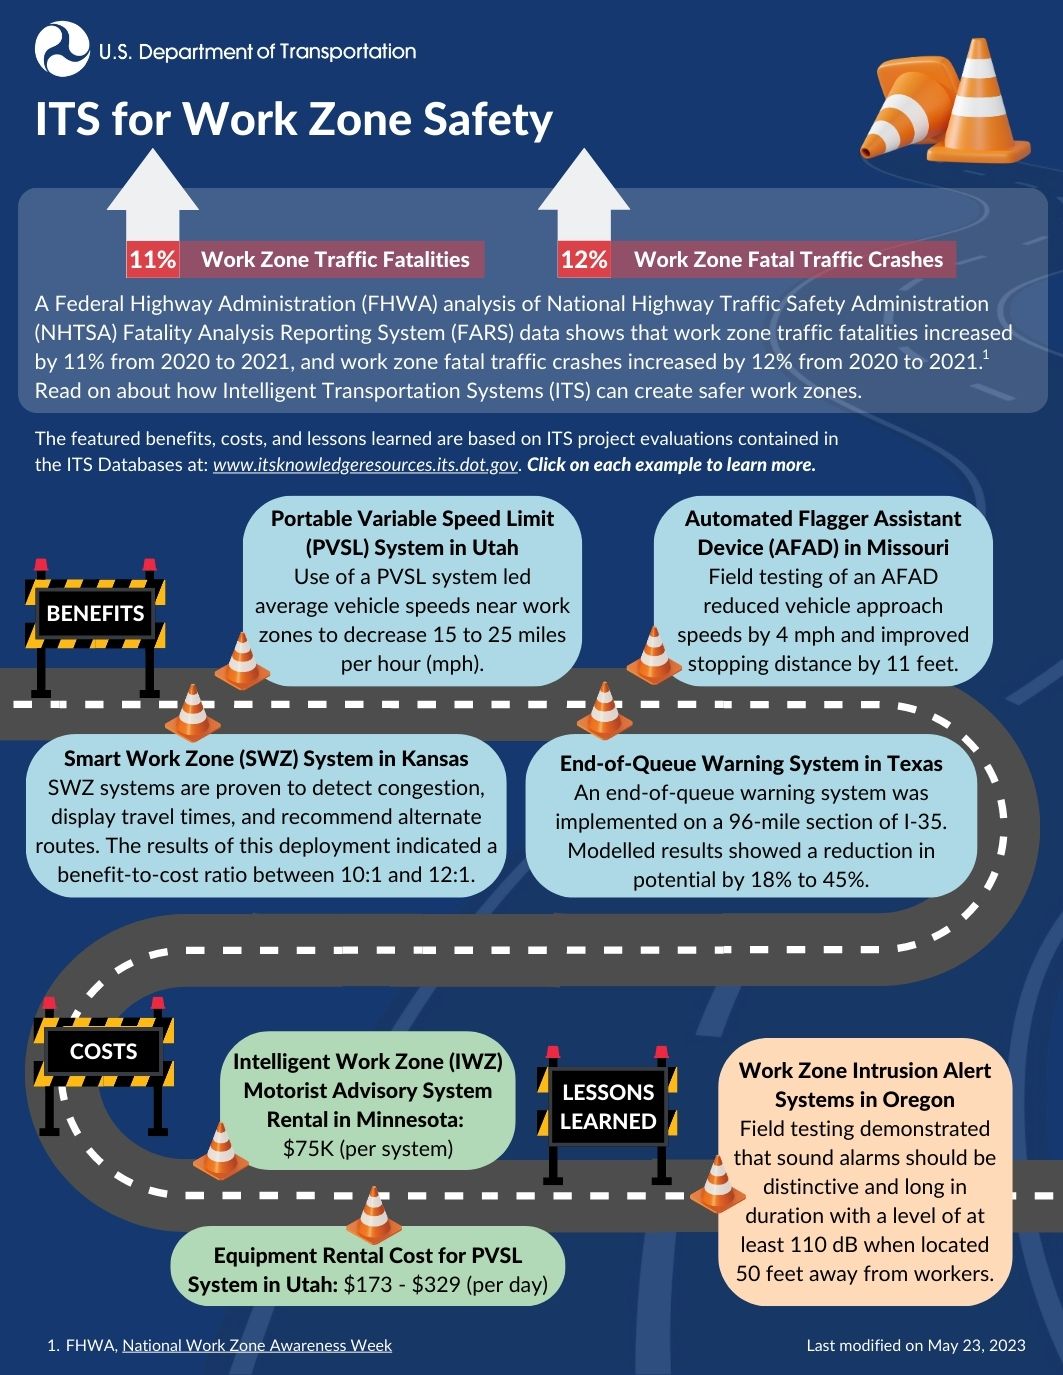 Infographic depicting examples of deployed ITS for work zone safety, including portable variable speed limit systems in Utah, automated flagger assistant devices in Missouri, smart work zone systems in Kansas, and end-of-queue warning systems in Texas.